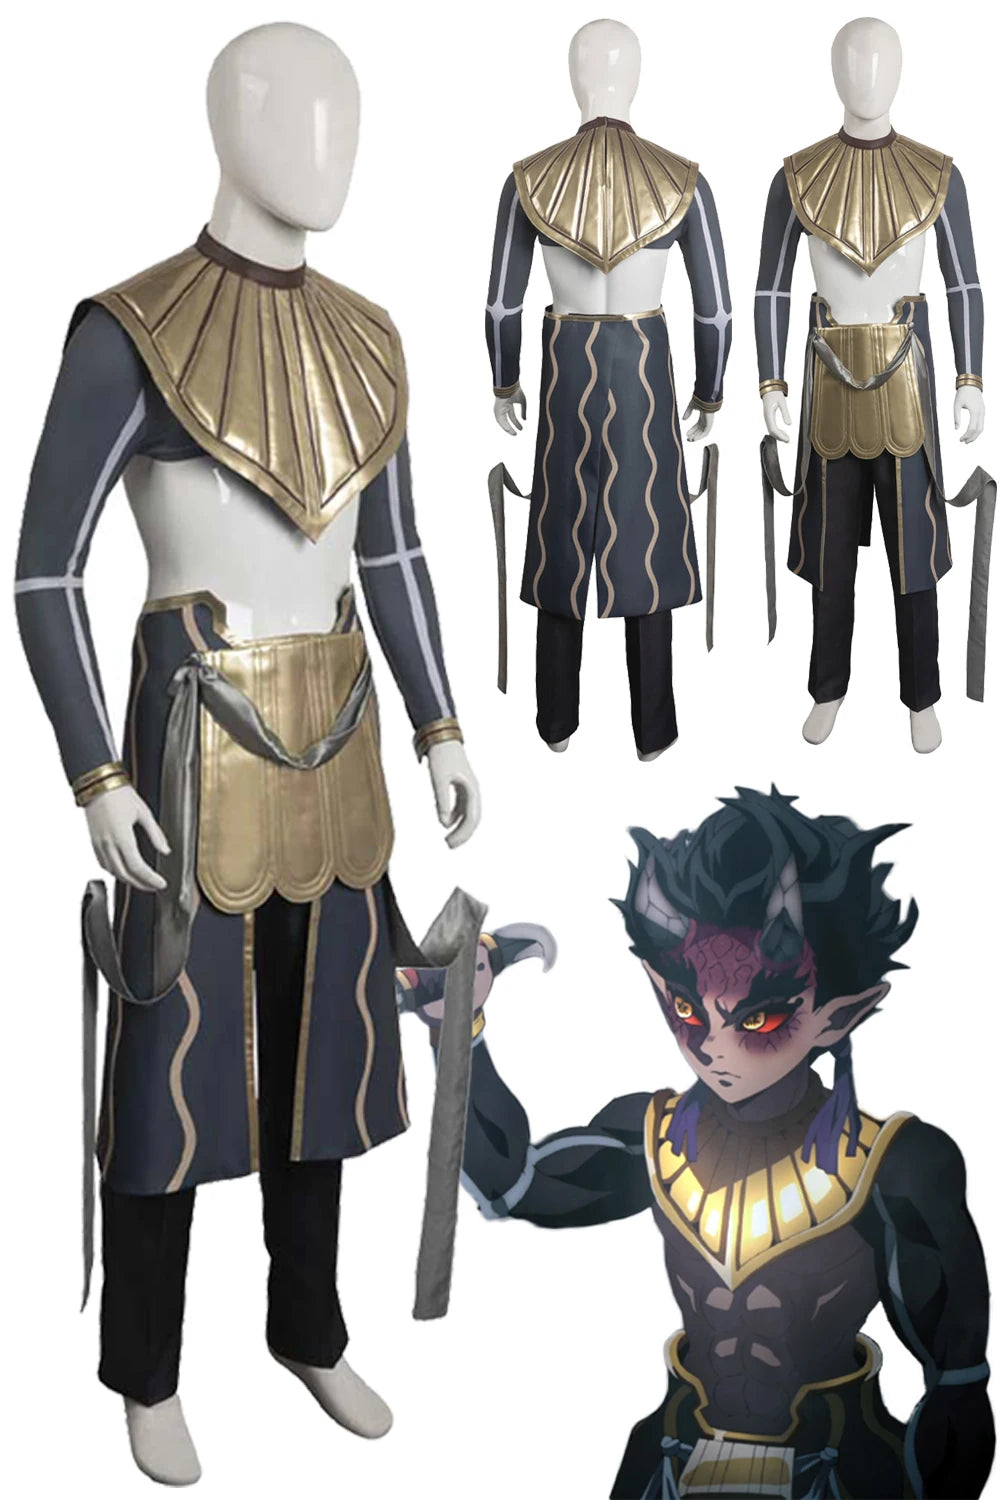 Cosplay Fantasy Anime Demon Slayer Costume Disguise Adult Men Cosplay Roleplay Fantasia Outfit Male Halloween